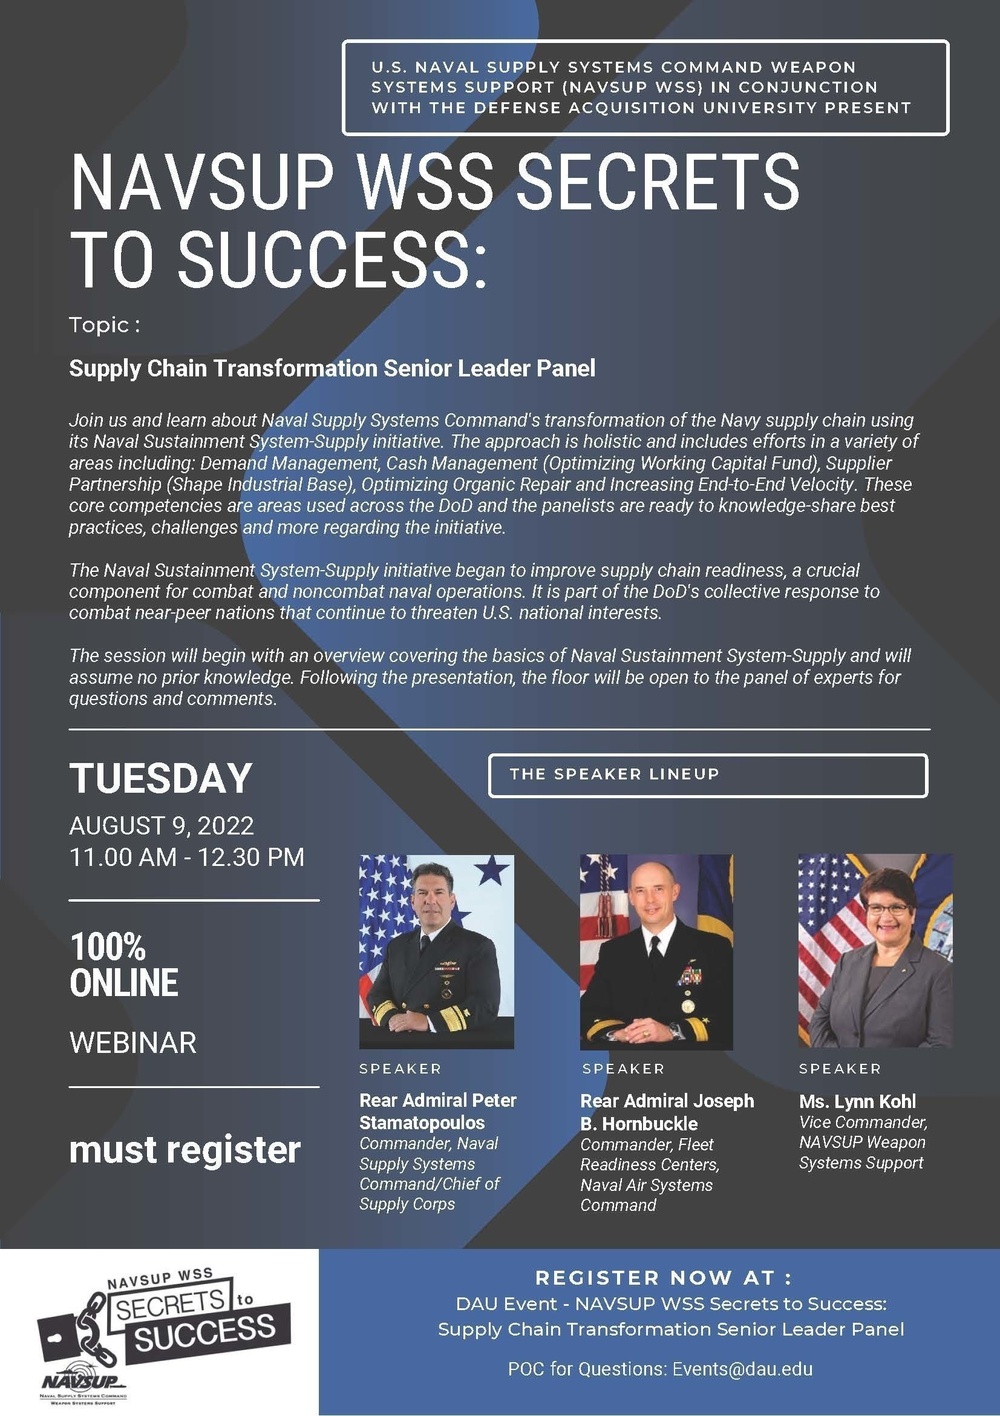 Naval Supply Systems Command Weapon Systems Support invites defense acquisition workforce to free webcast, supply transformation senior leader panel